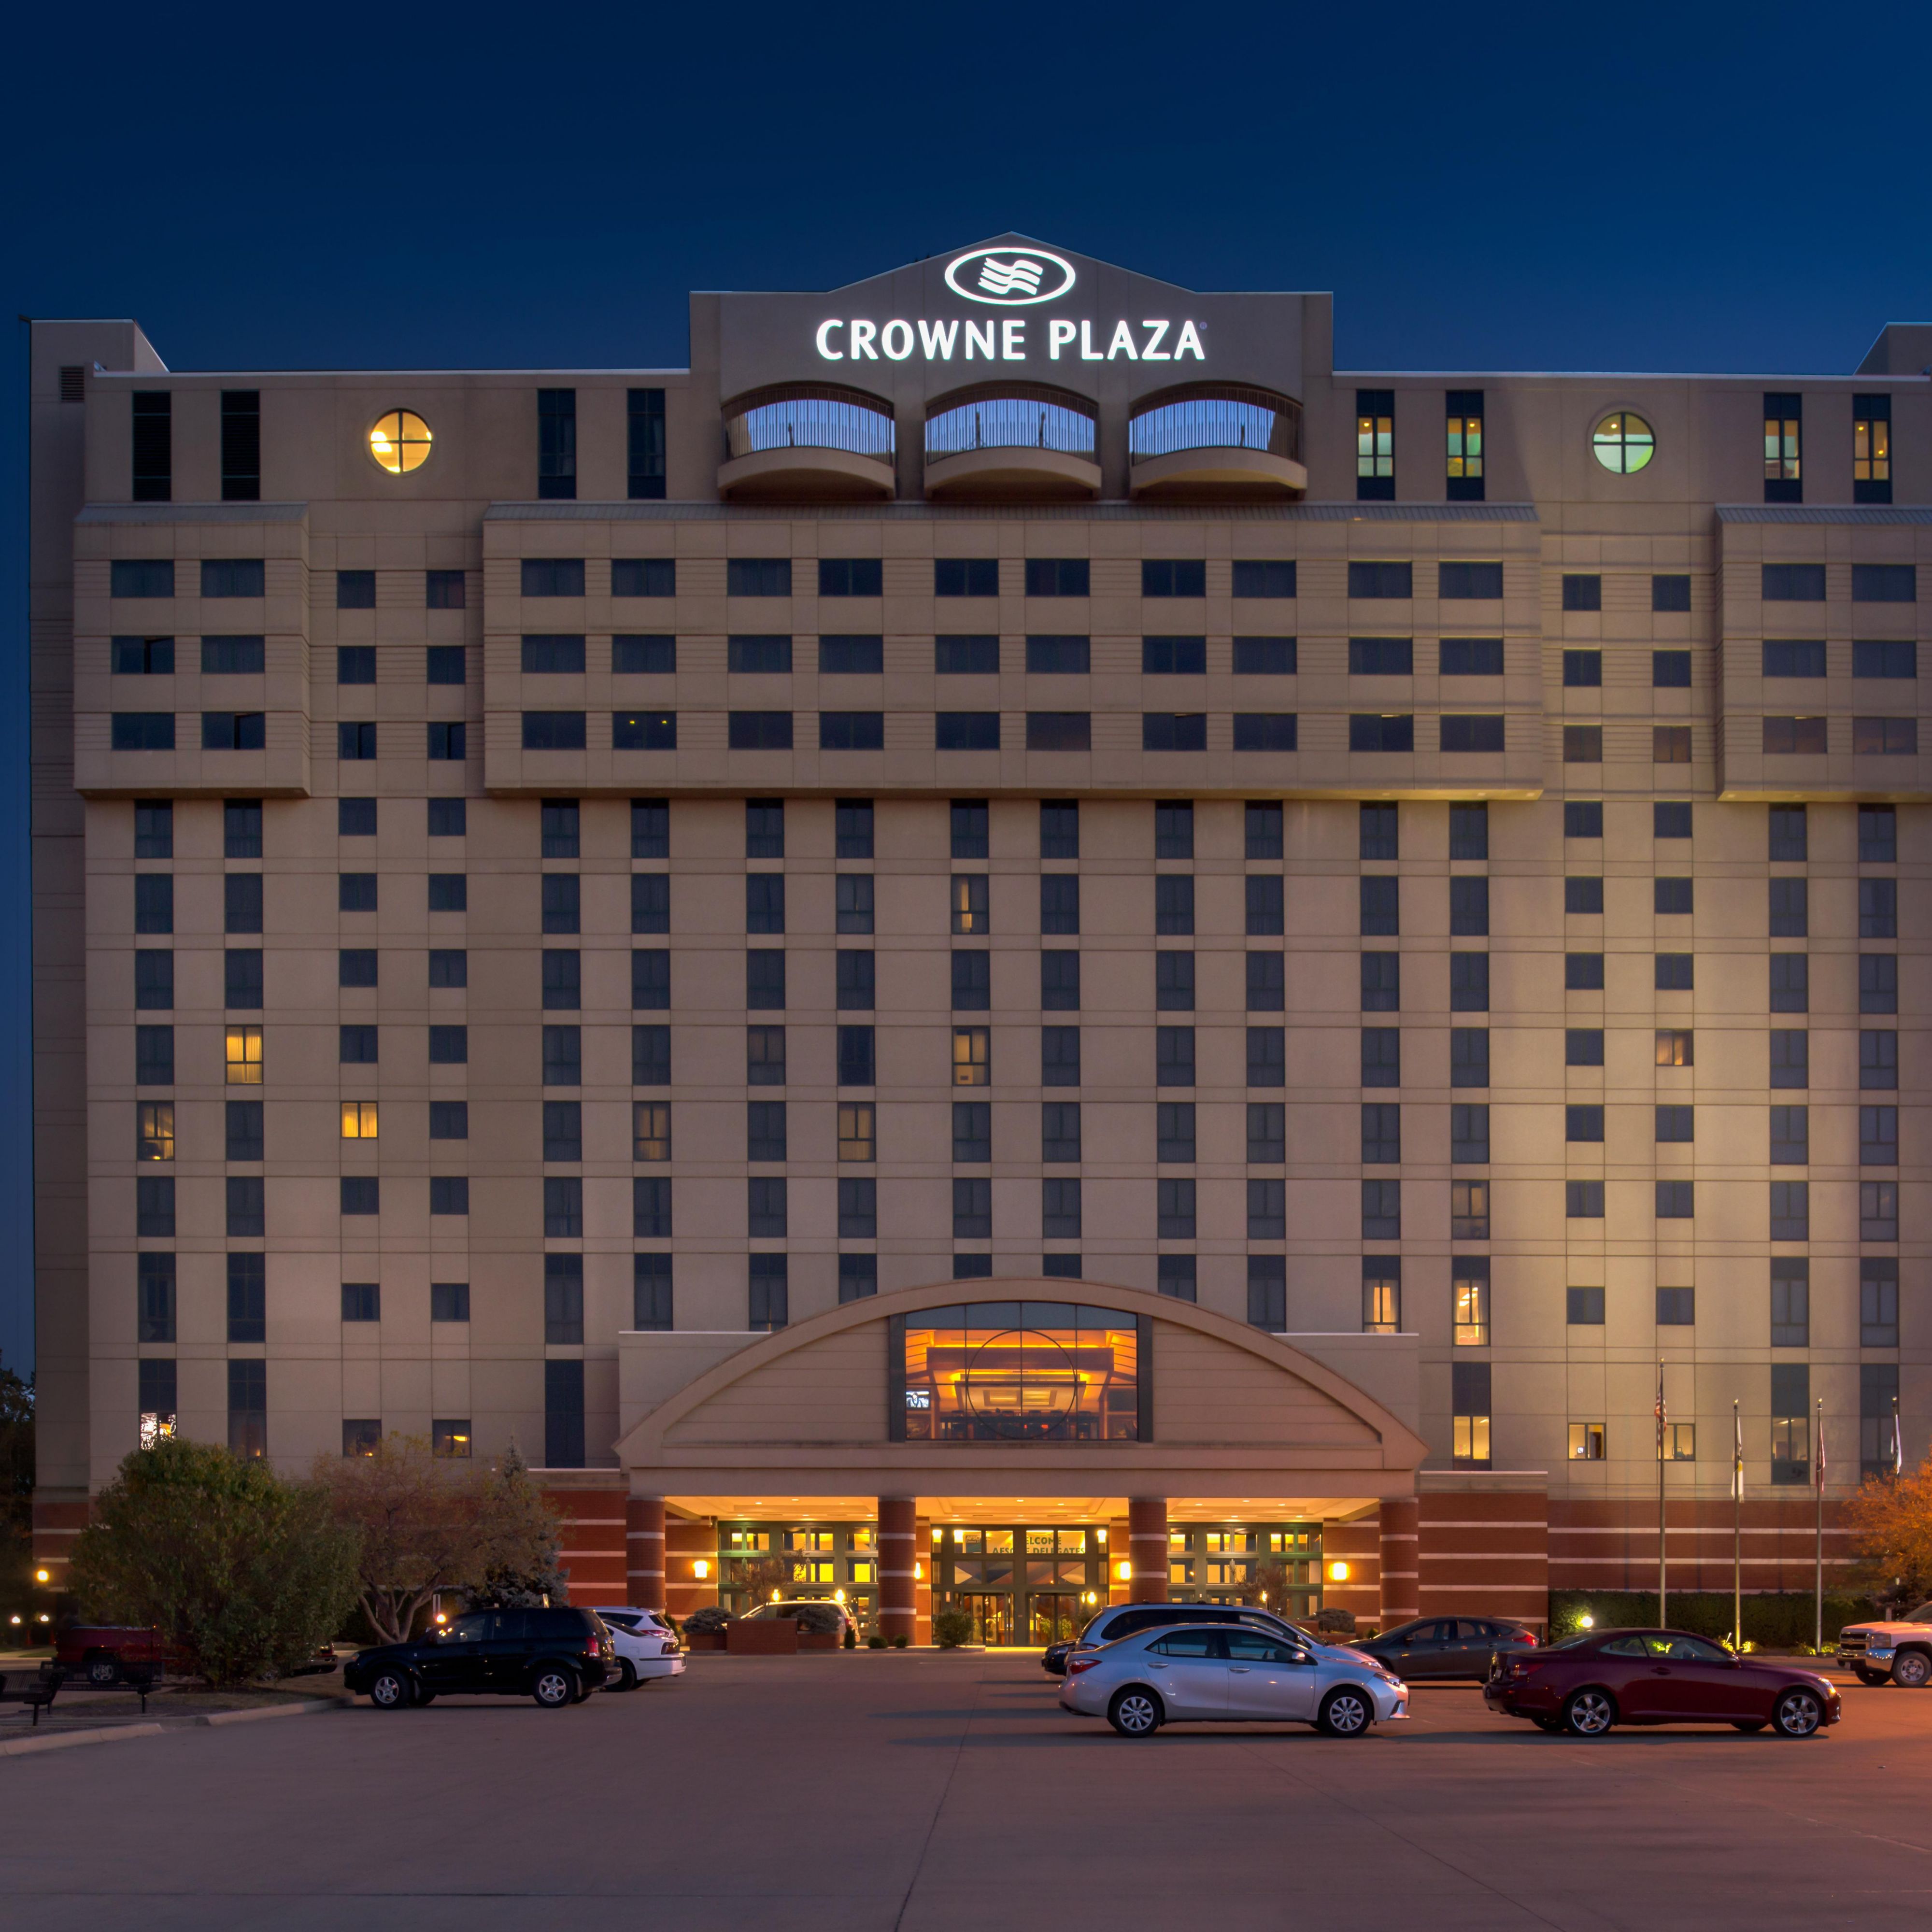 Crowne Plaza is located close to the Illinois State Fairgrounds.